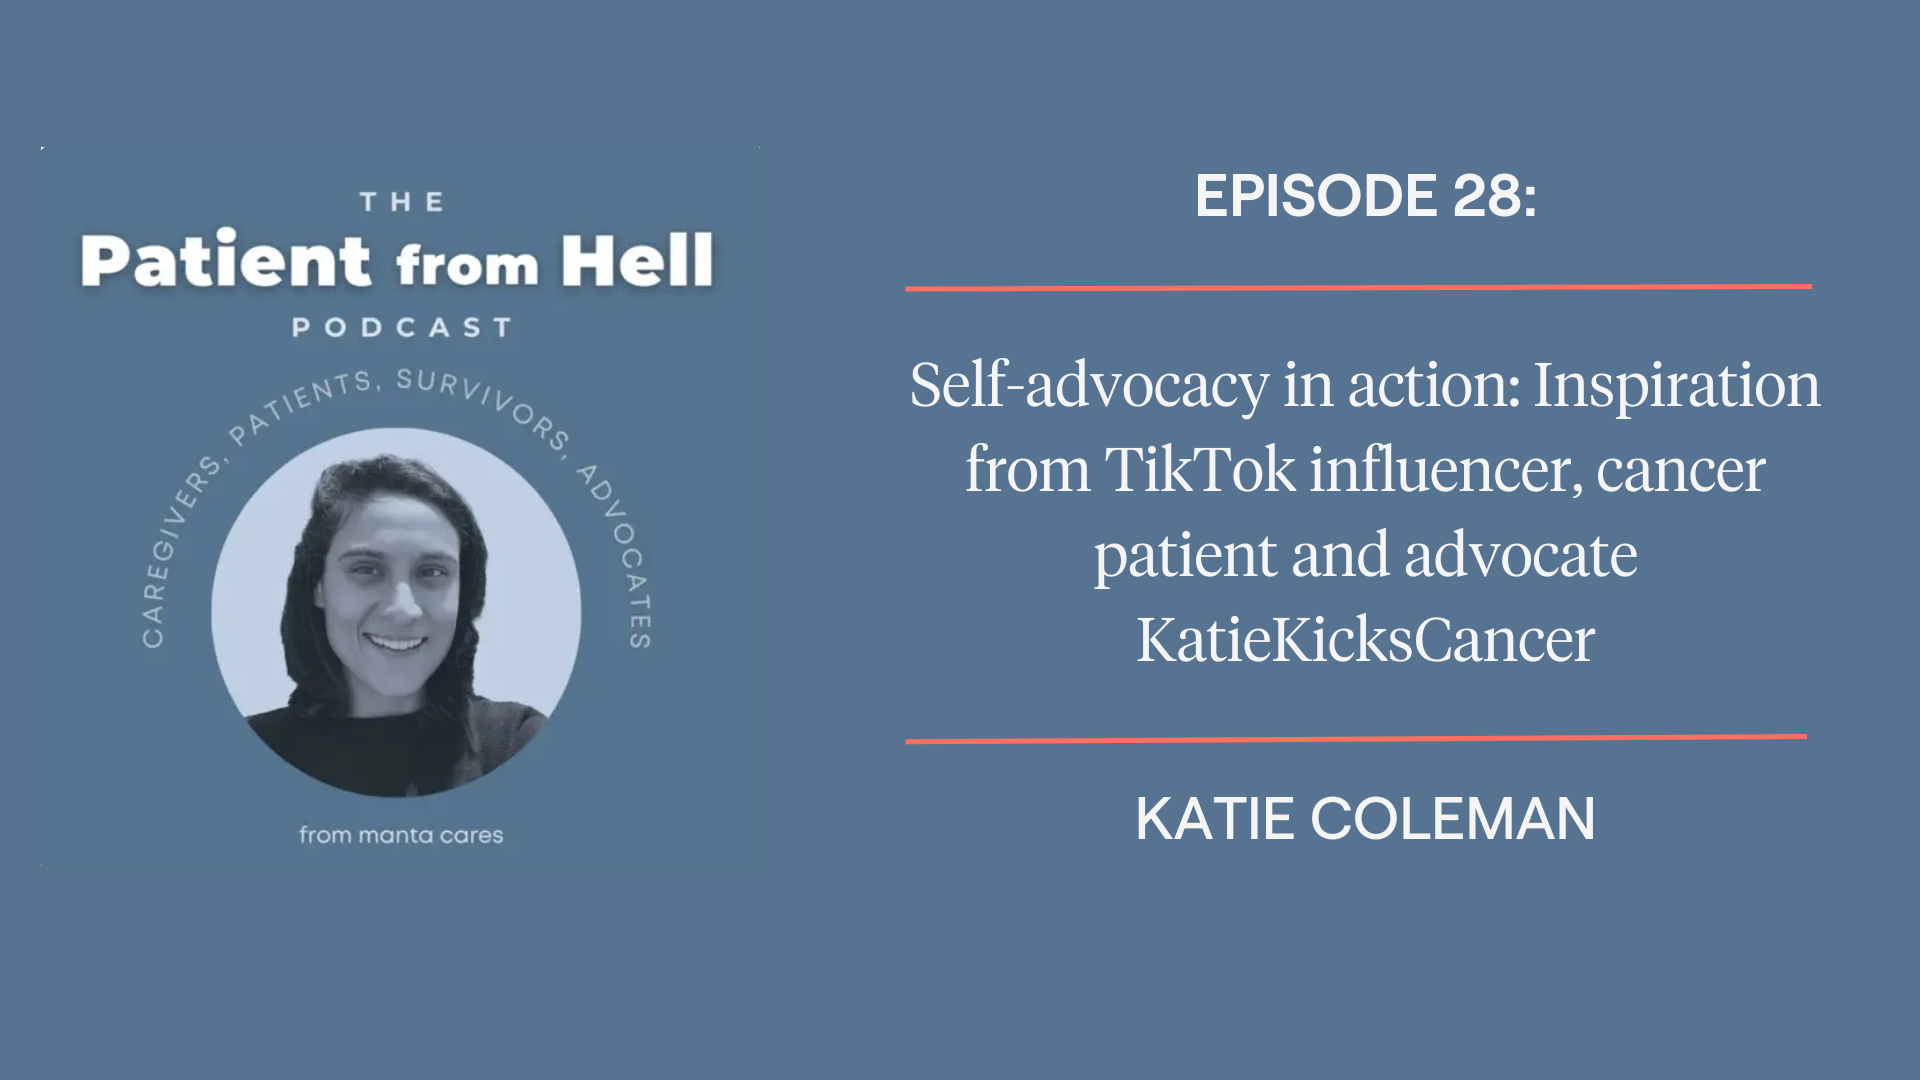 Load video: The power of social media and storytelling for rare cancer patients. The value of second opinions and shared decision making with your doctors. The importance of asking questions and self advocacy.